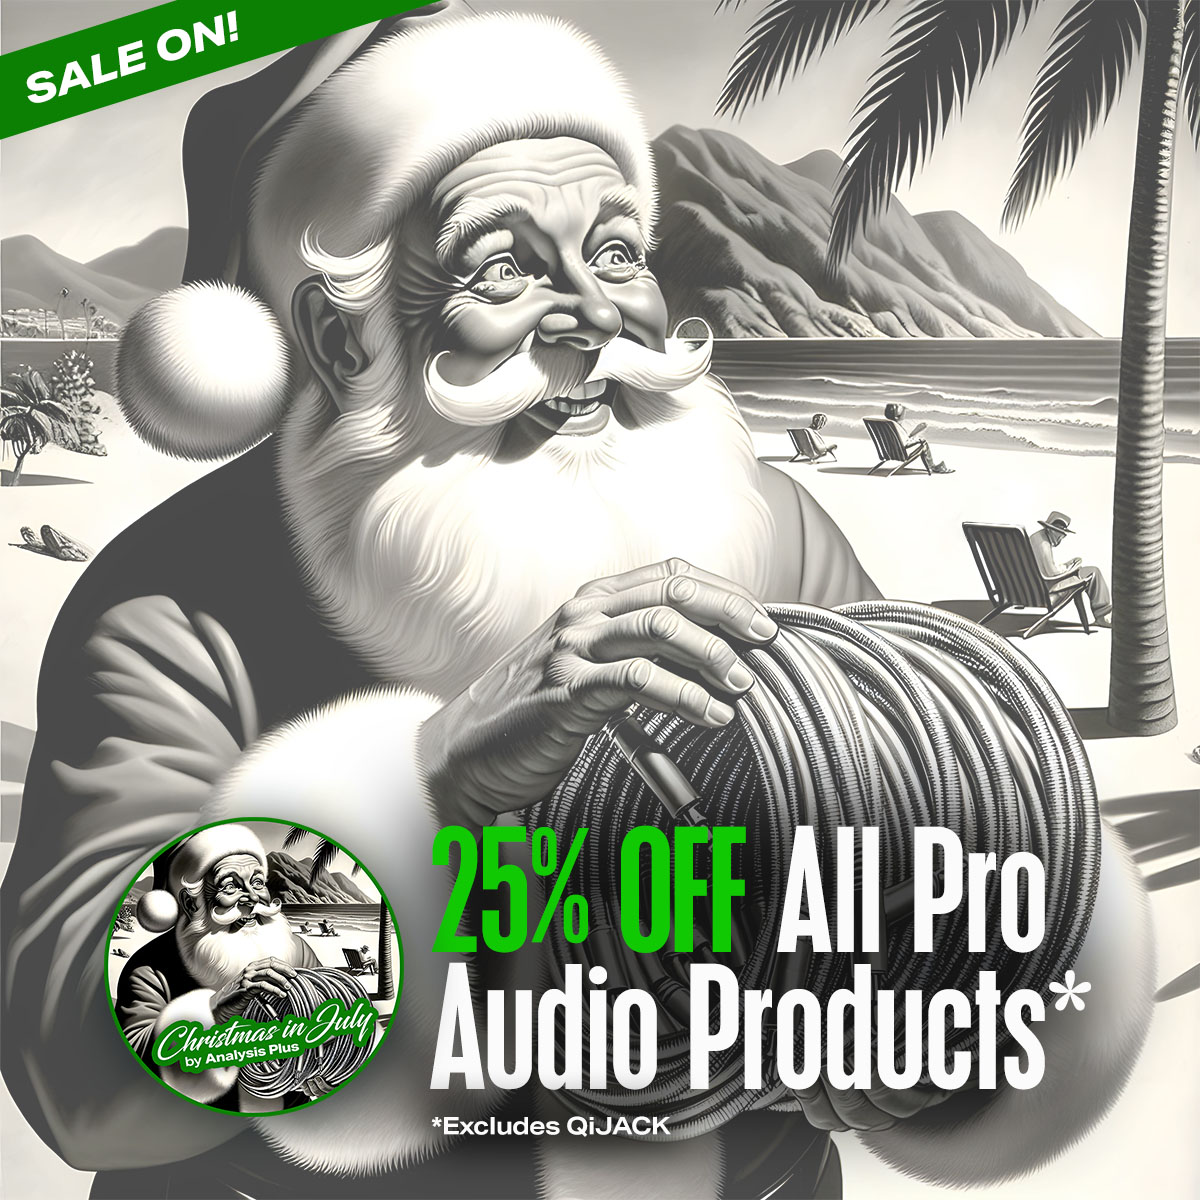 Christmas in July Pro Audio Sale